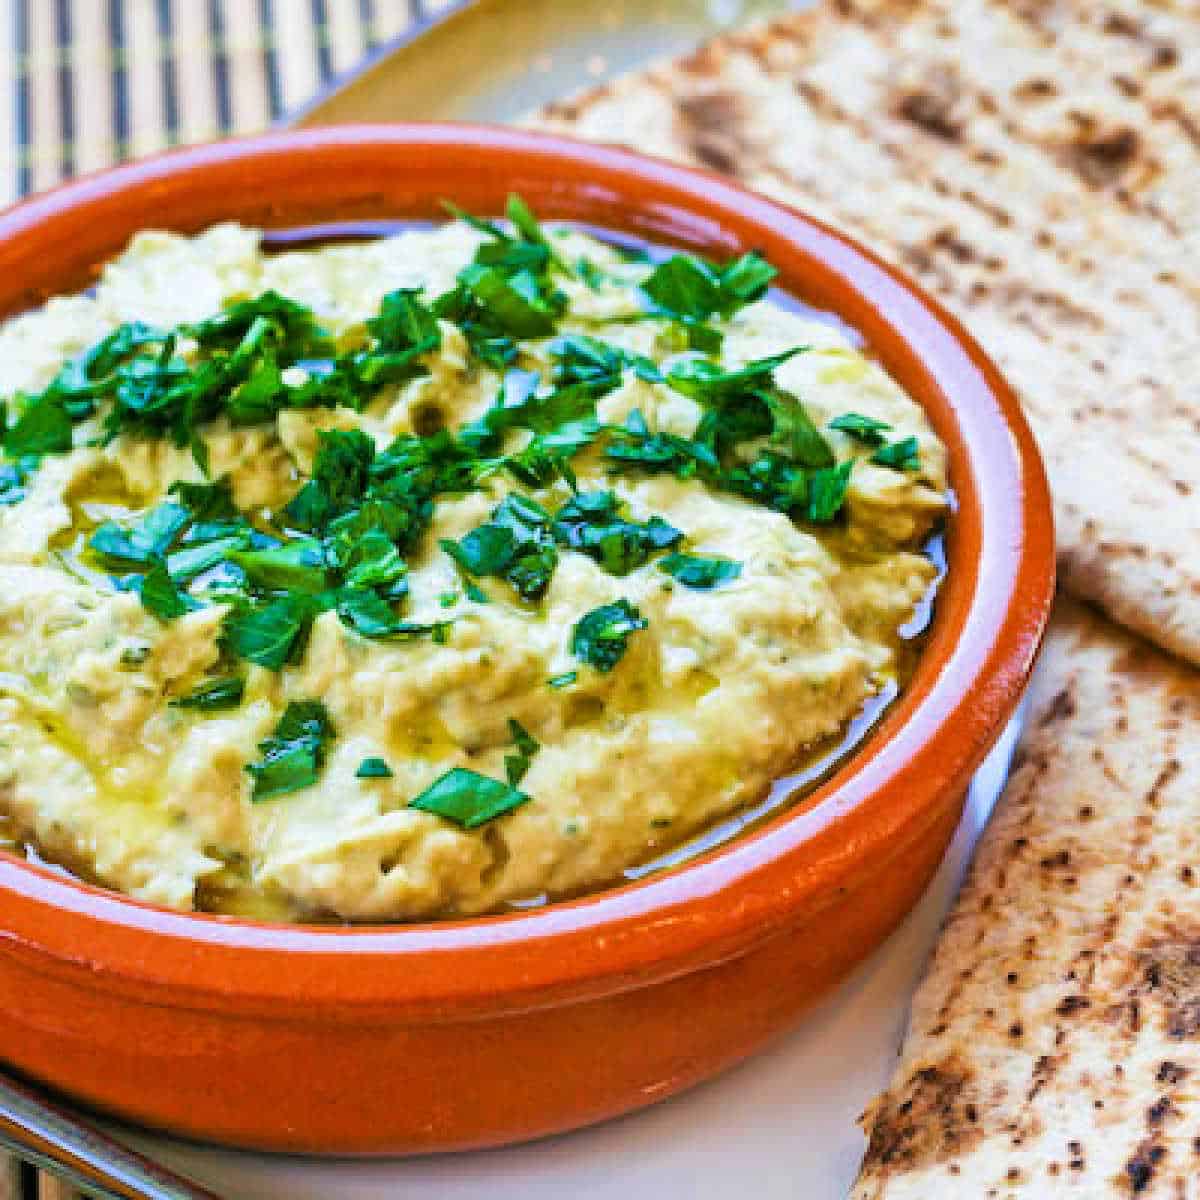 Julia Child's White Bean Hummus in terra cotta bowl with low-carb pita on the side.